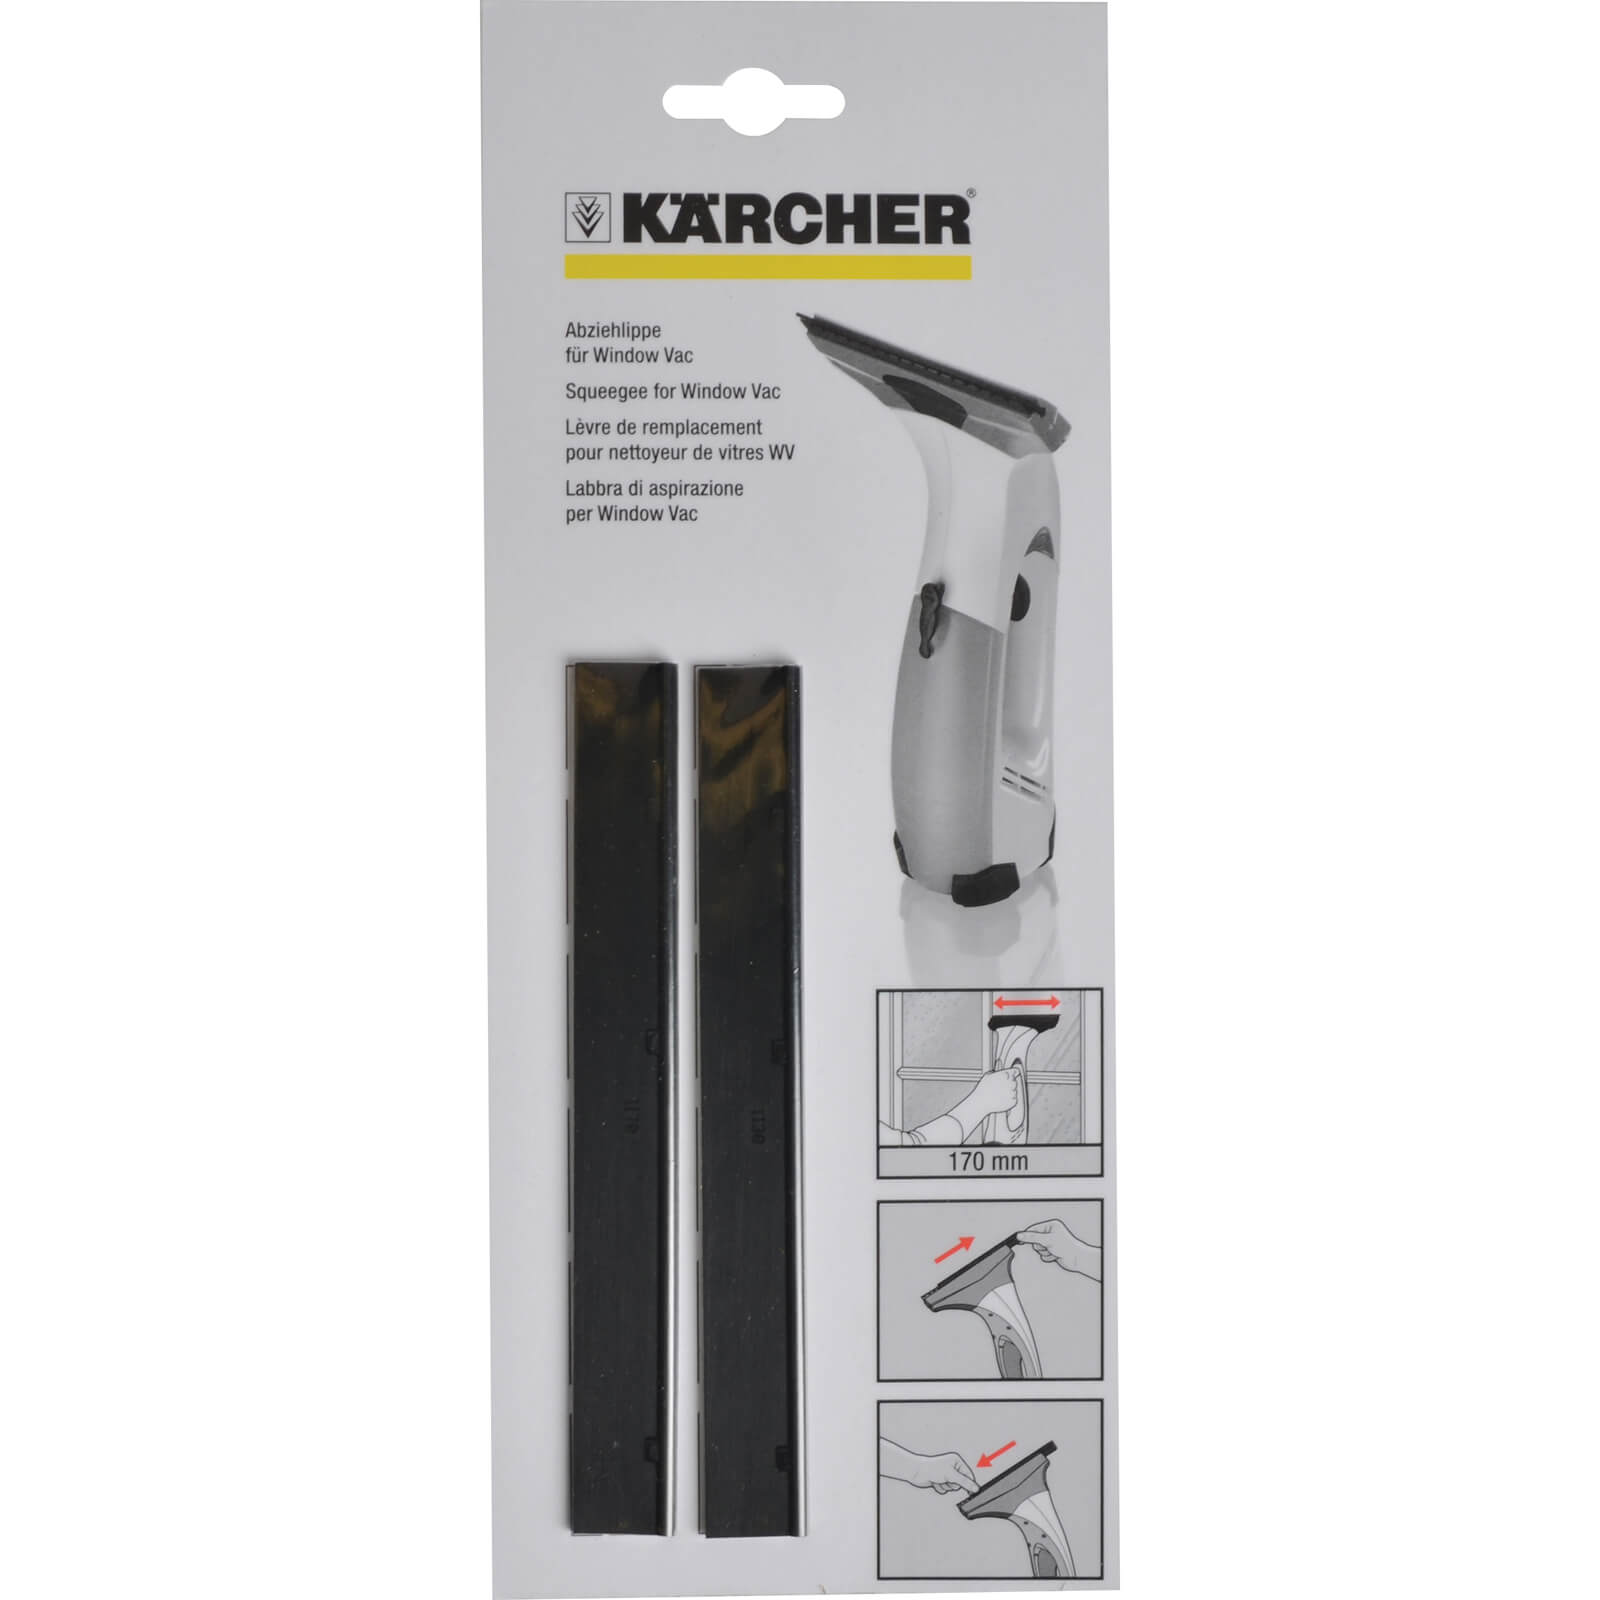 Karcher Replacement Squeegee Blades 170mm for Karcher Window Vacs Pack of 2